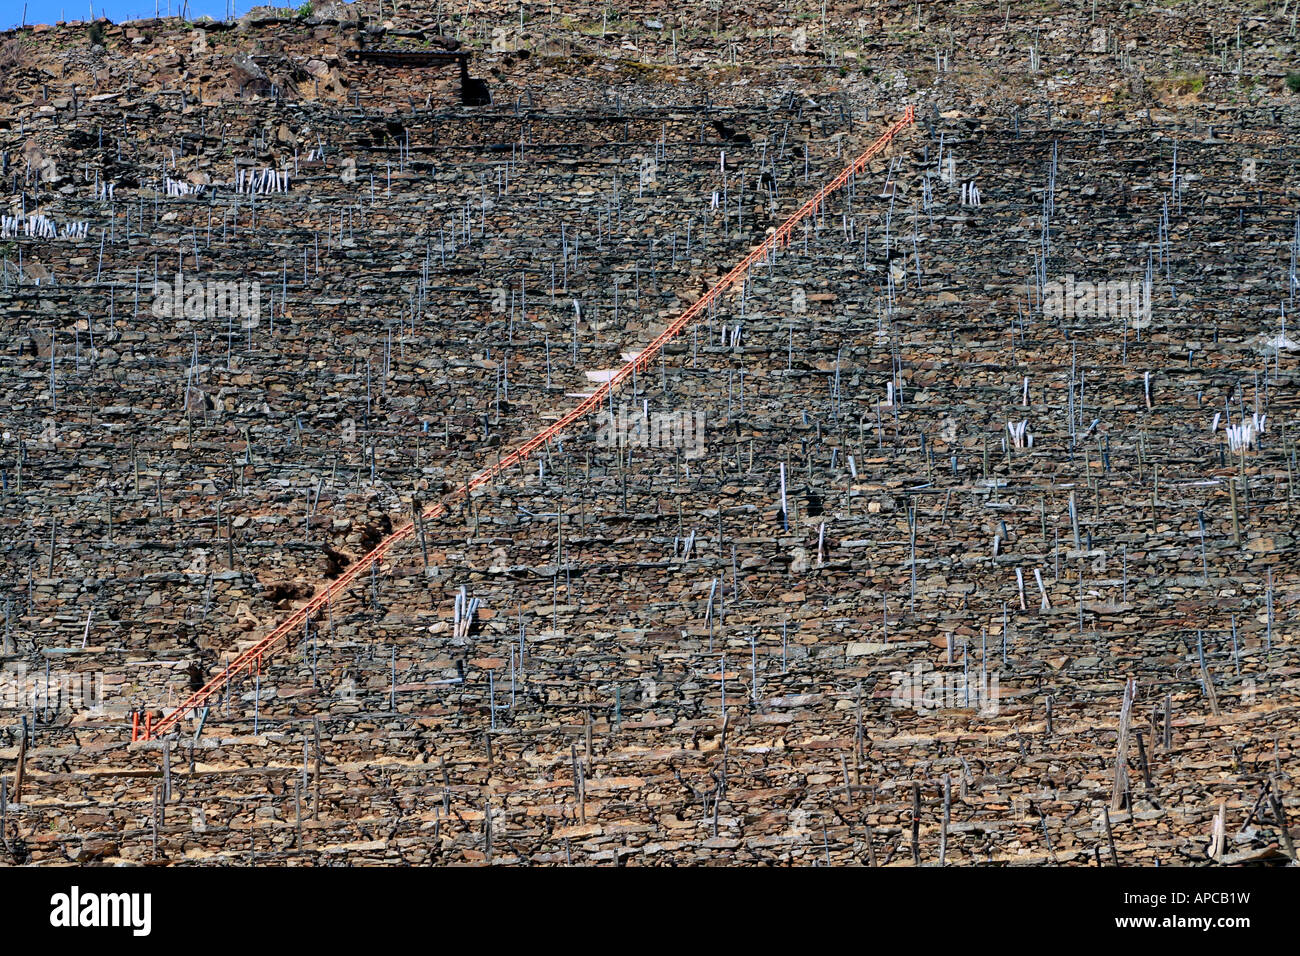 Terracing for vines, Ribeira Sacra, Galicia, Spain. The ladder is used to transport the grapes up the steep sides of the canyon. Stock Photo